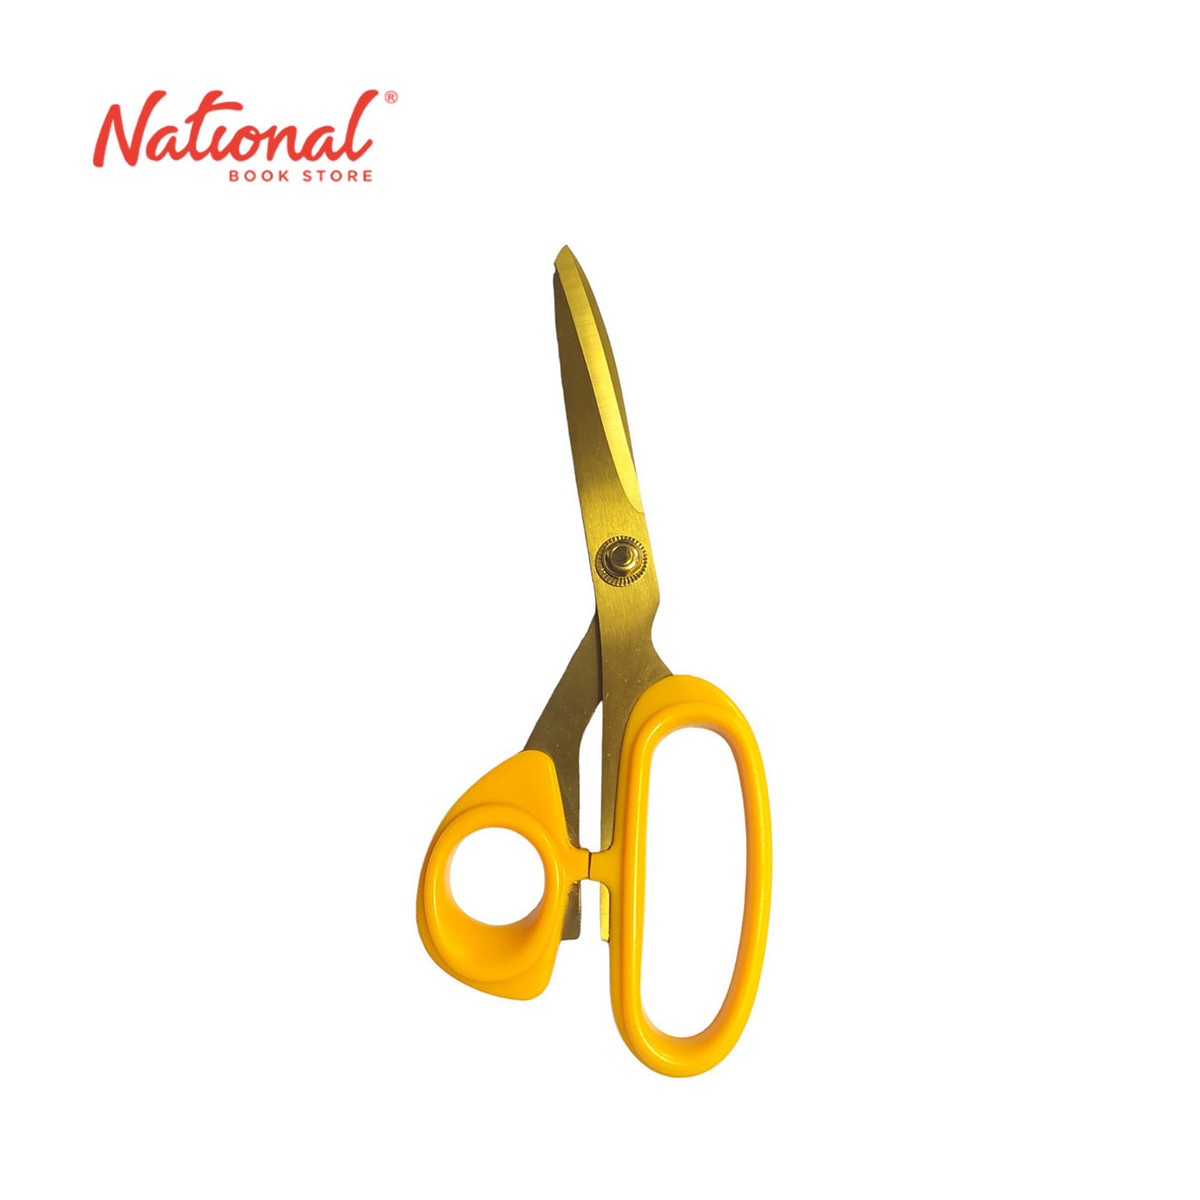 Long Life Multi-Purpose Scissors Plated Gold 8.5 Inches S3185G - School & Office Supplies